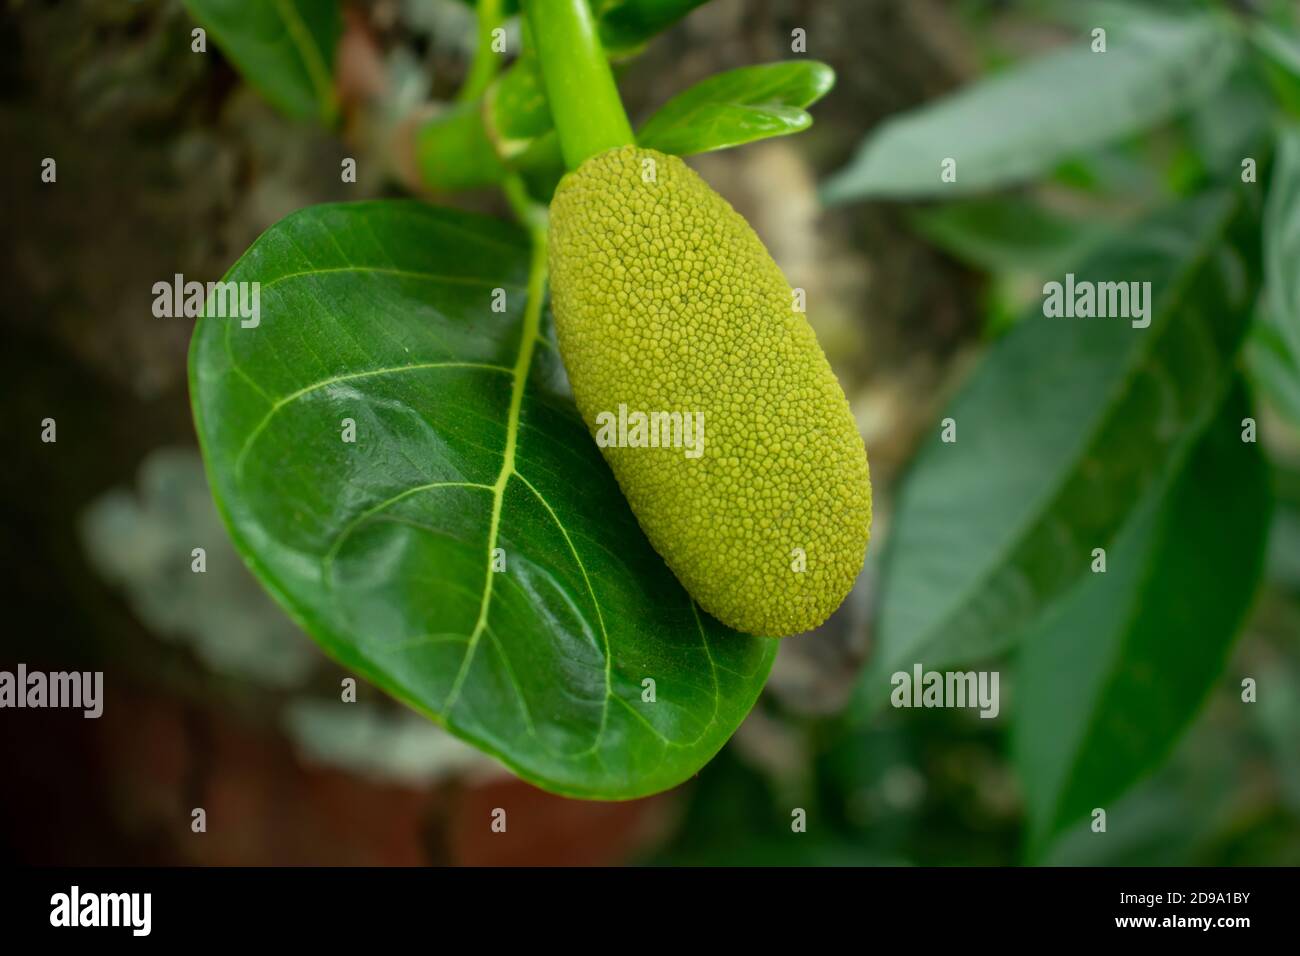 On the leaf a small jackfruit growing and sweet food Stock Photo